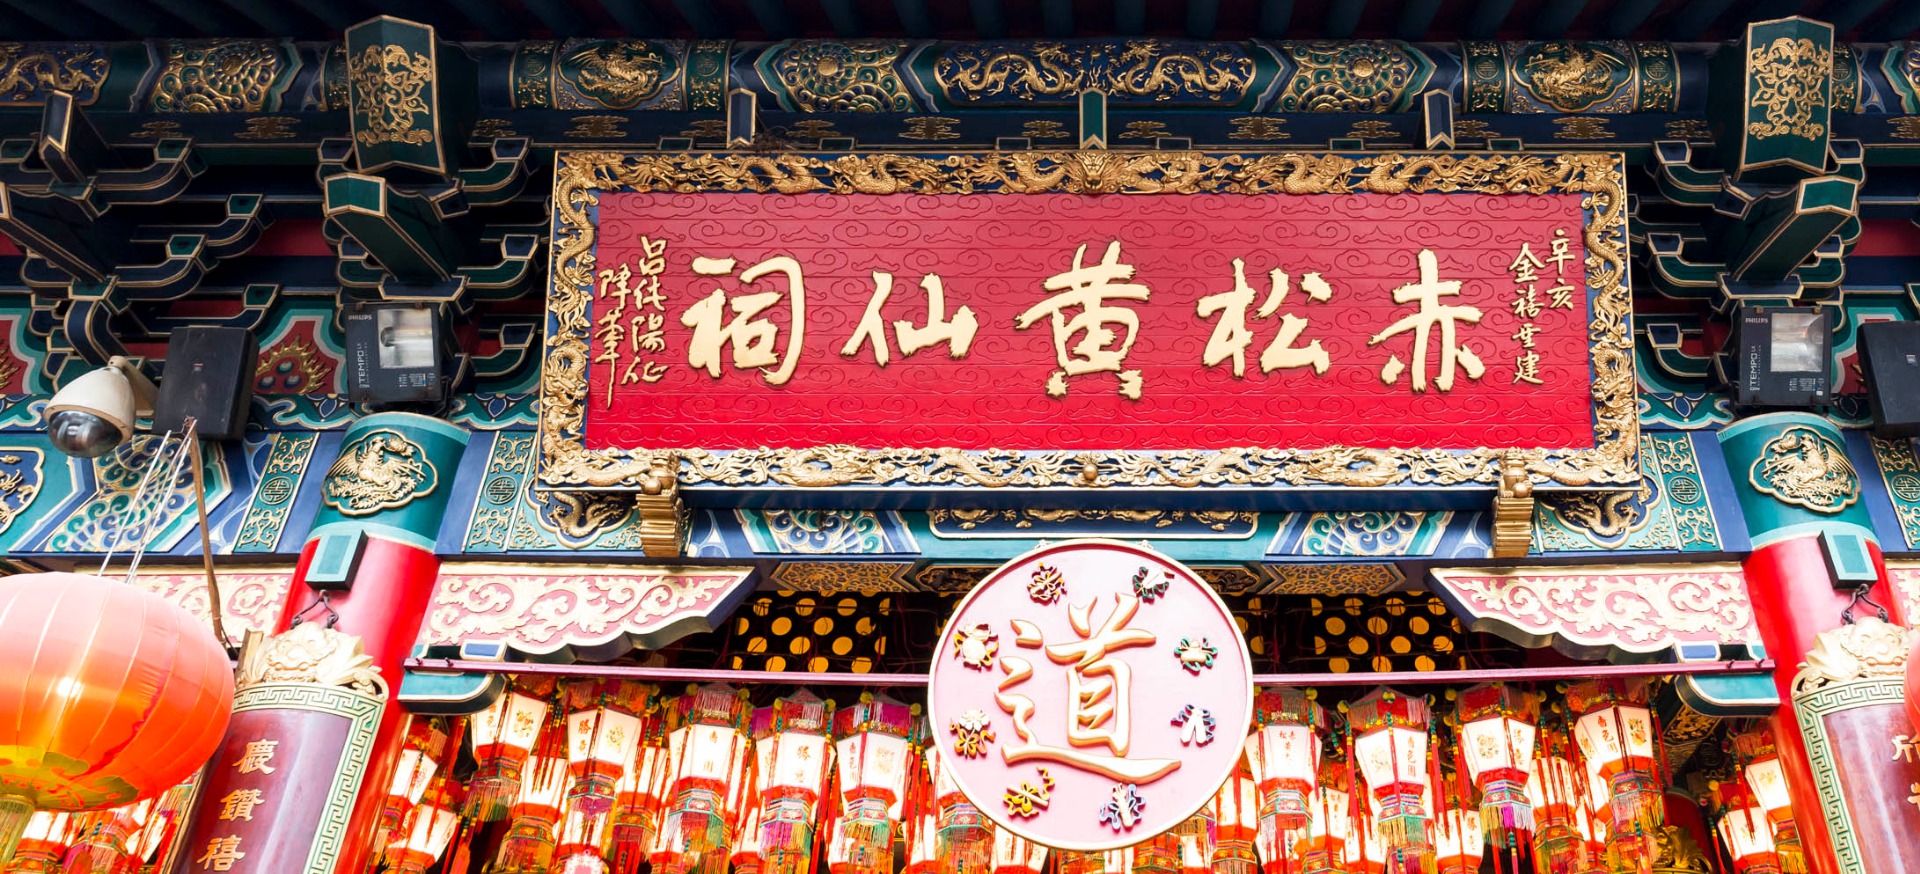 Wong Tai Sin<br>Belief and Customs